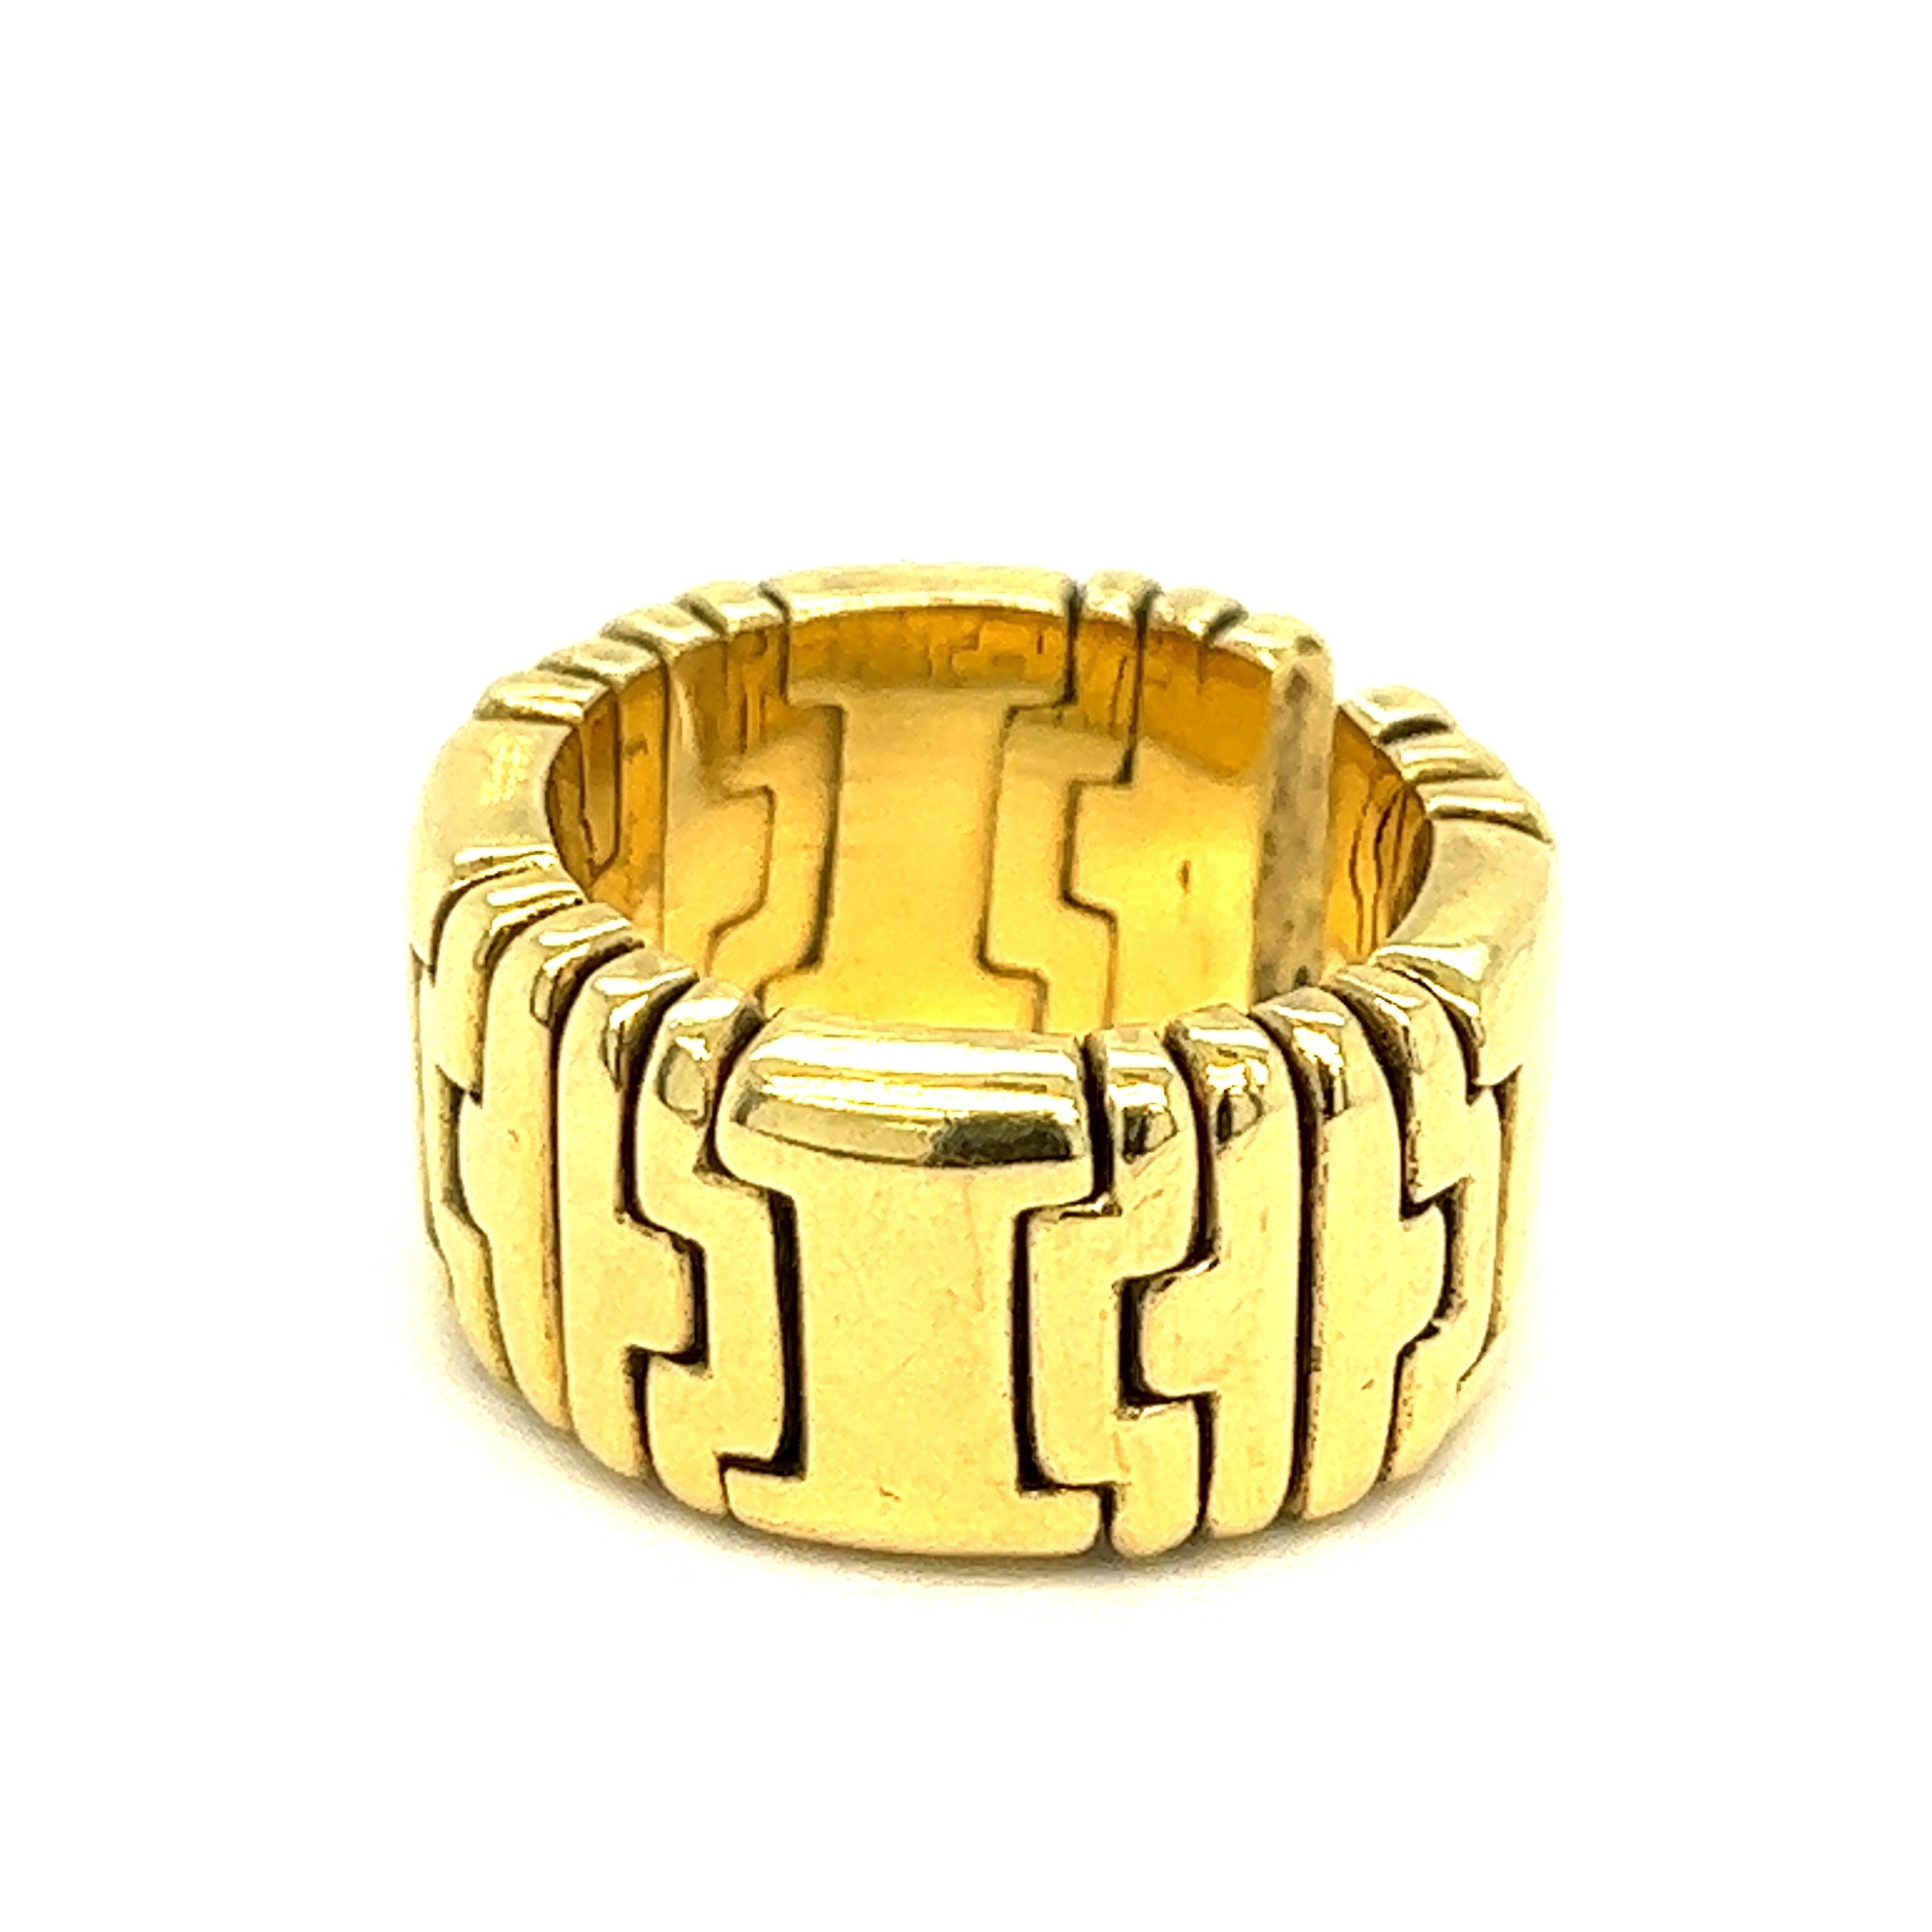 Gold band ring, made in Italy

18 karat yellow gold; marked Fred, Italy

Size: 5.5 US
Total weight: 19.8 grams